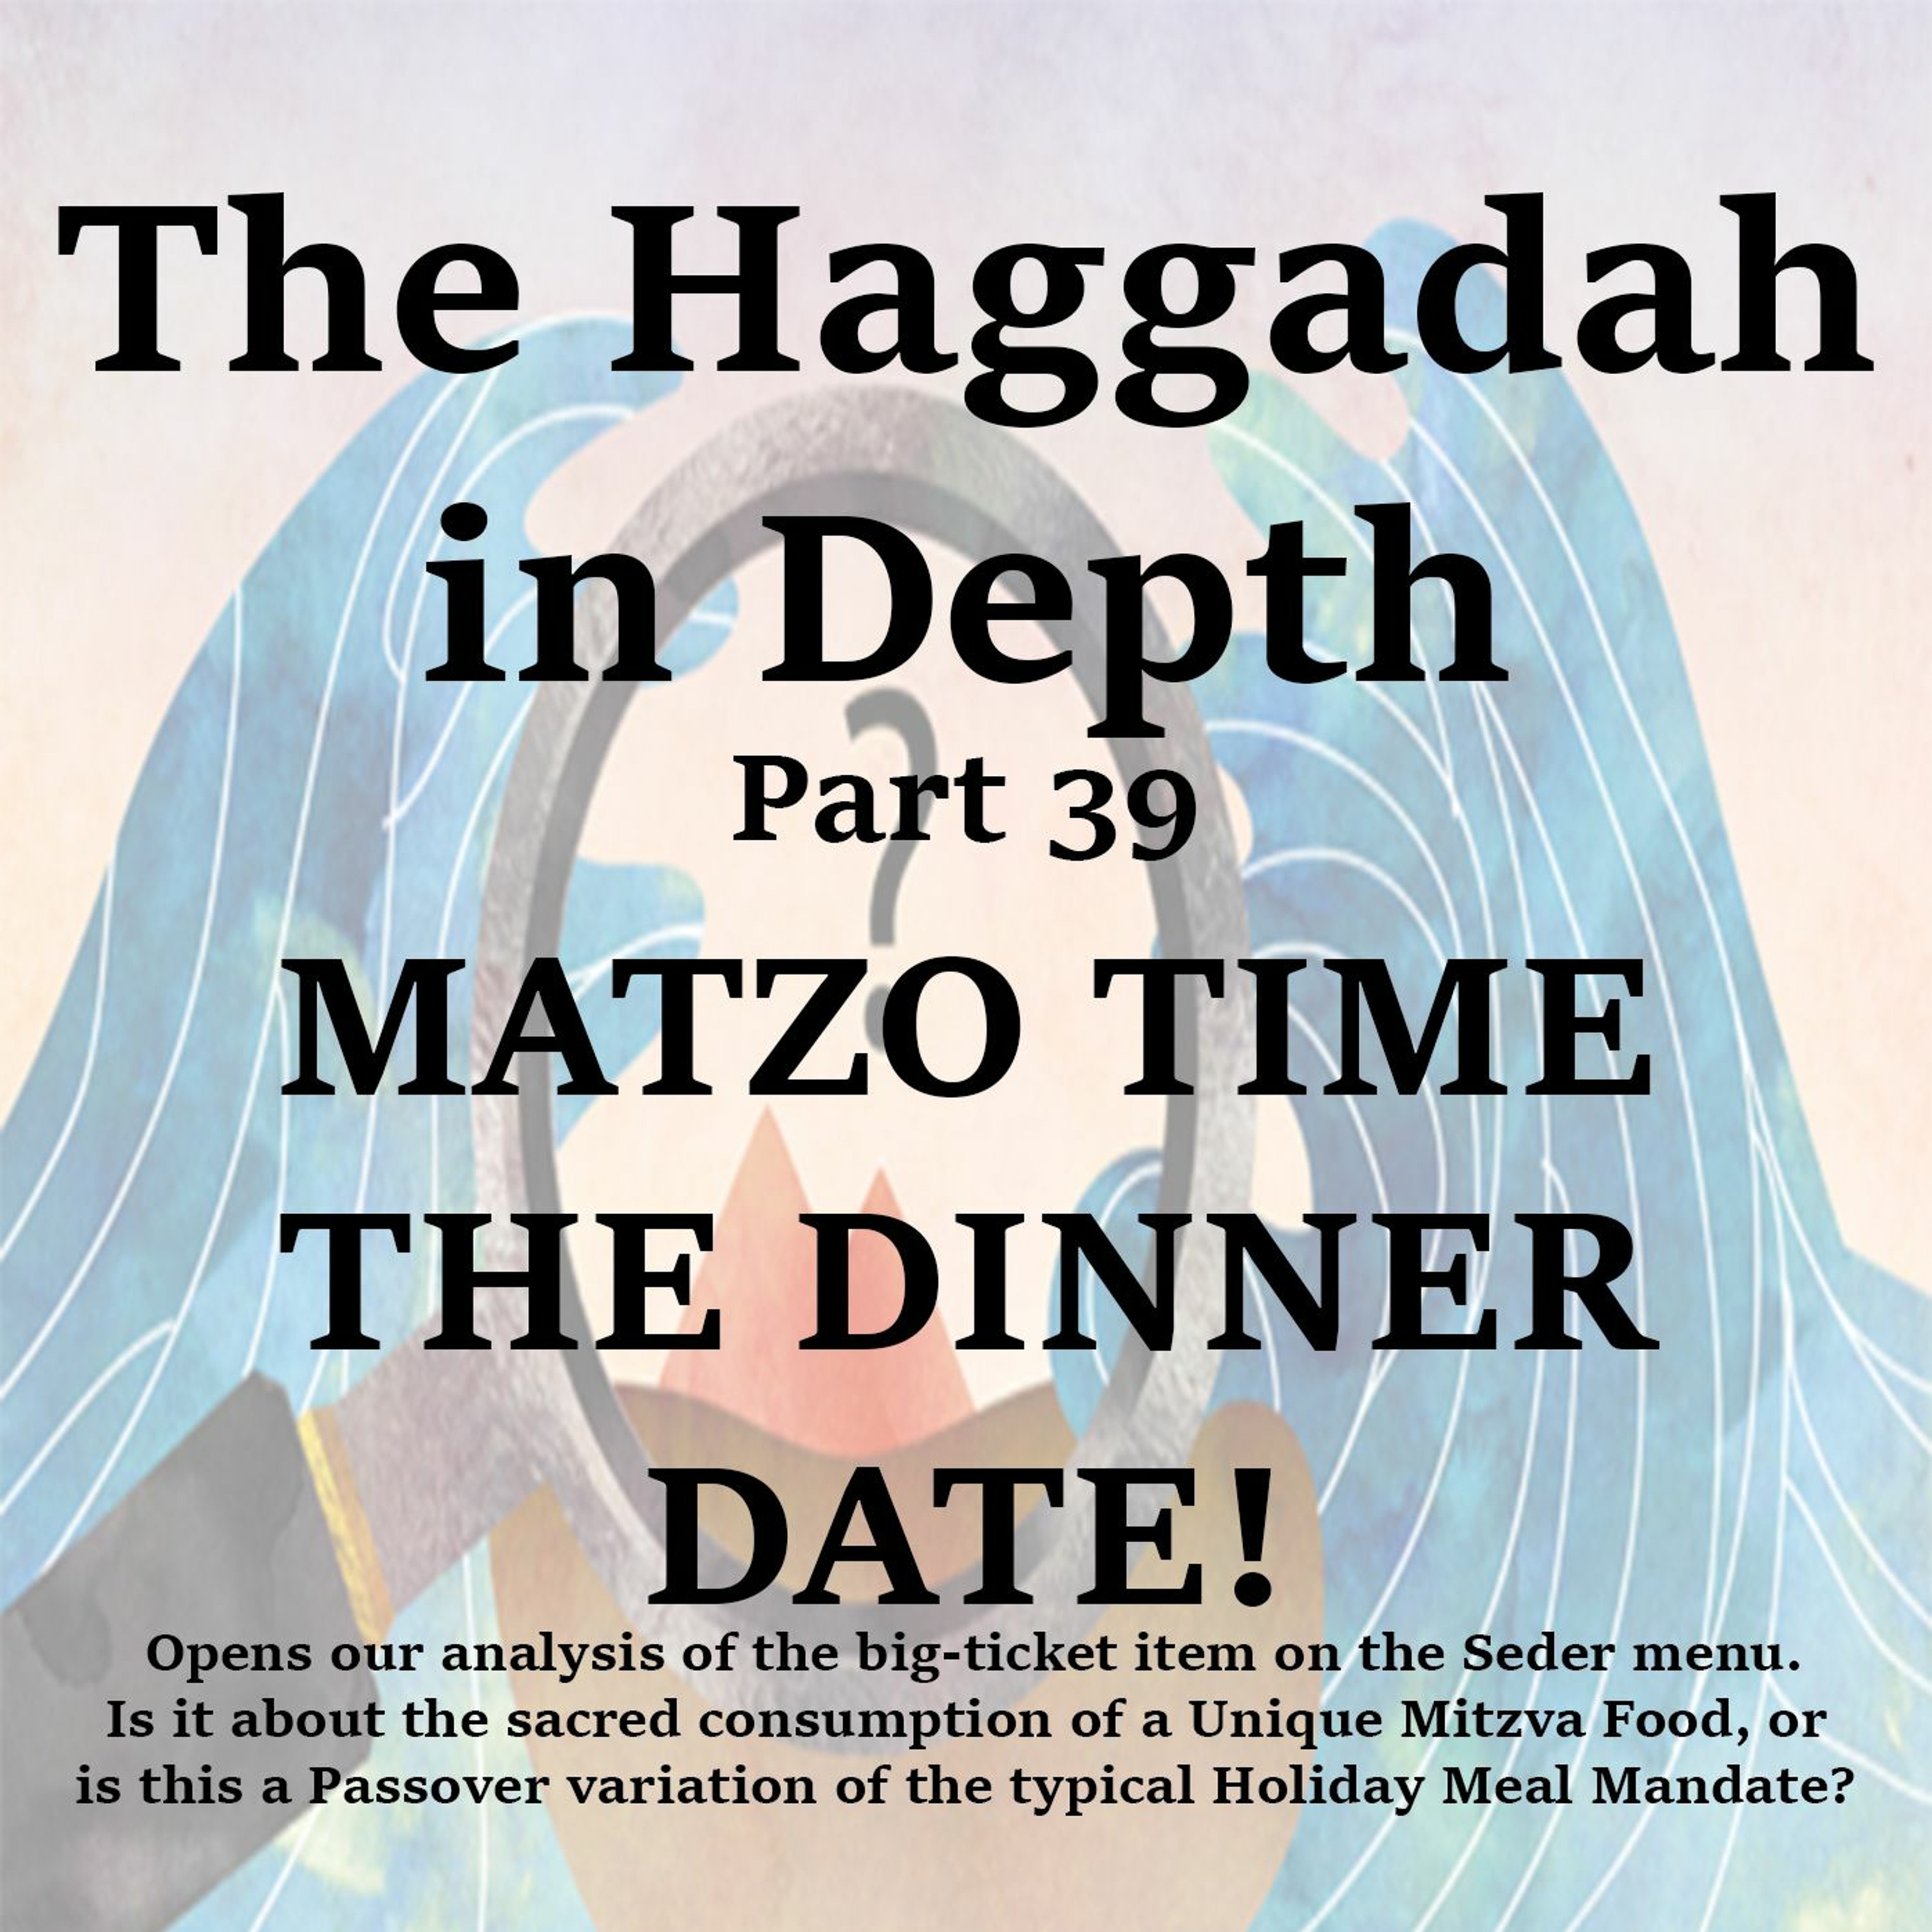 MATZO TIME THE DINNER DATE!